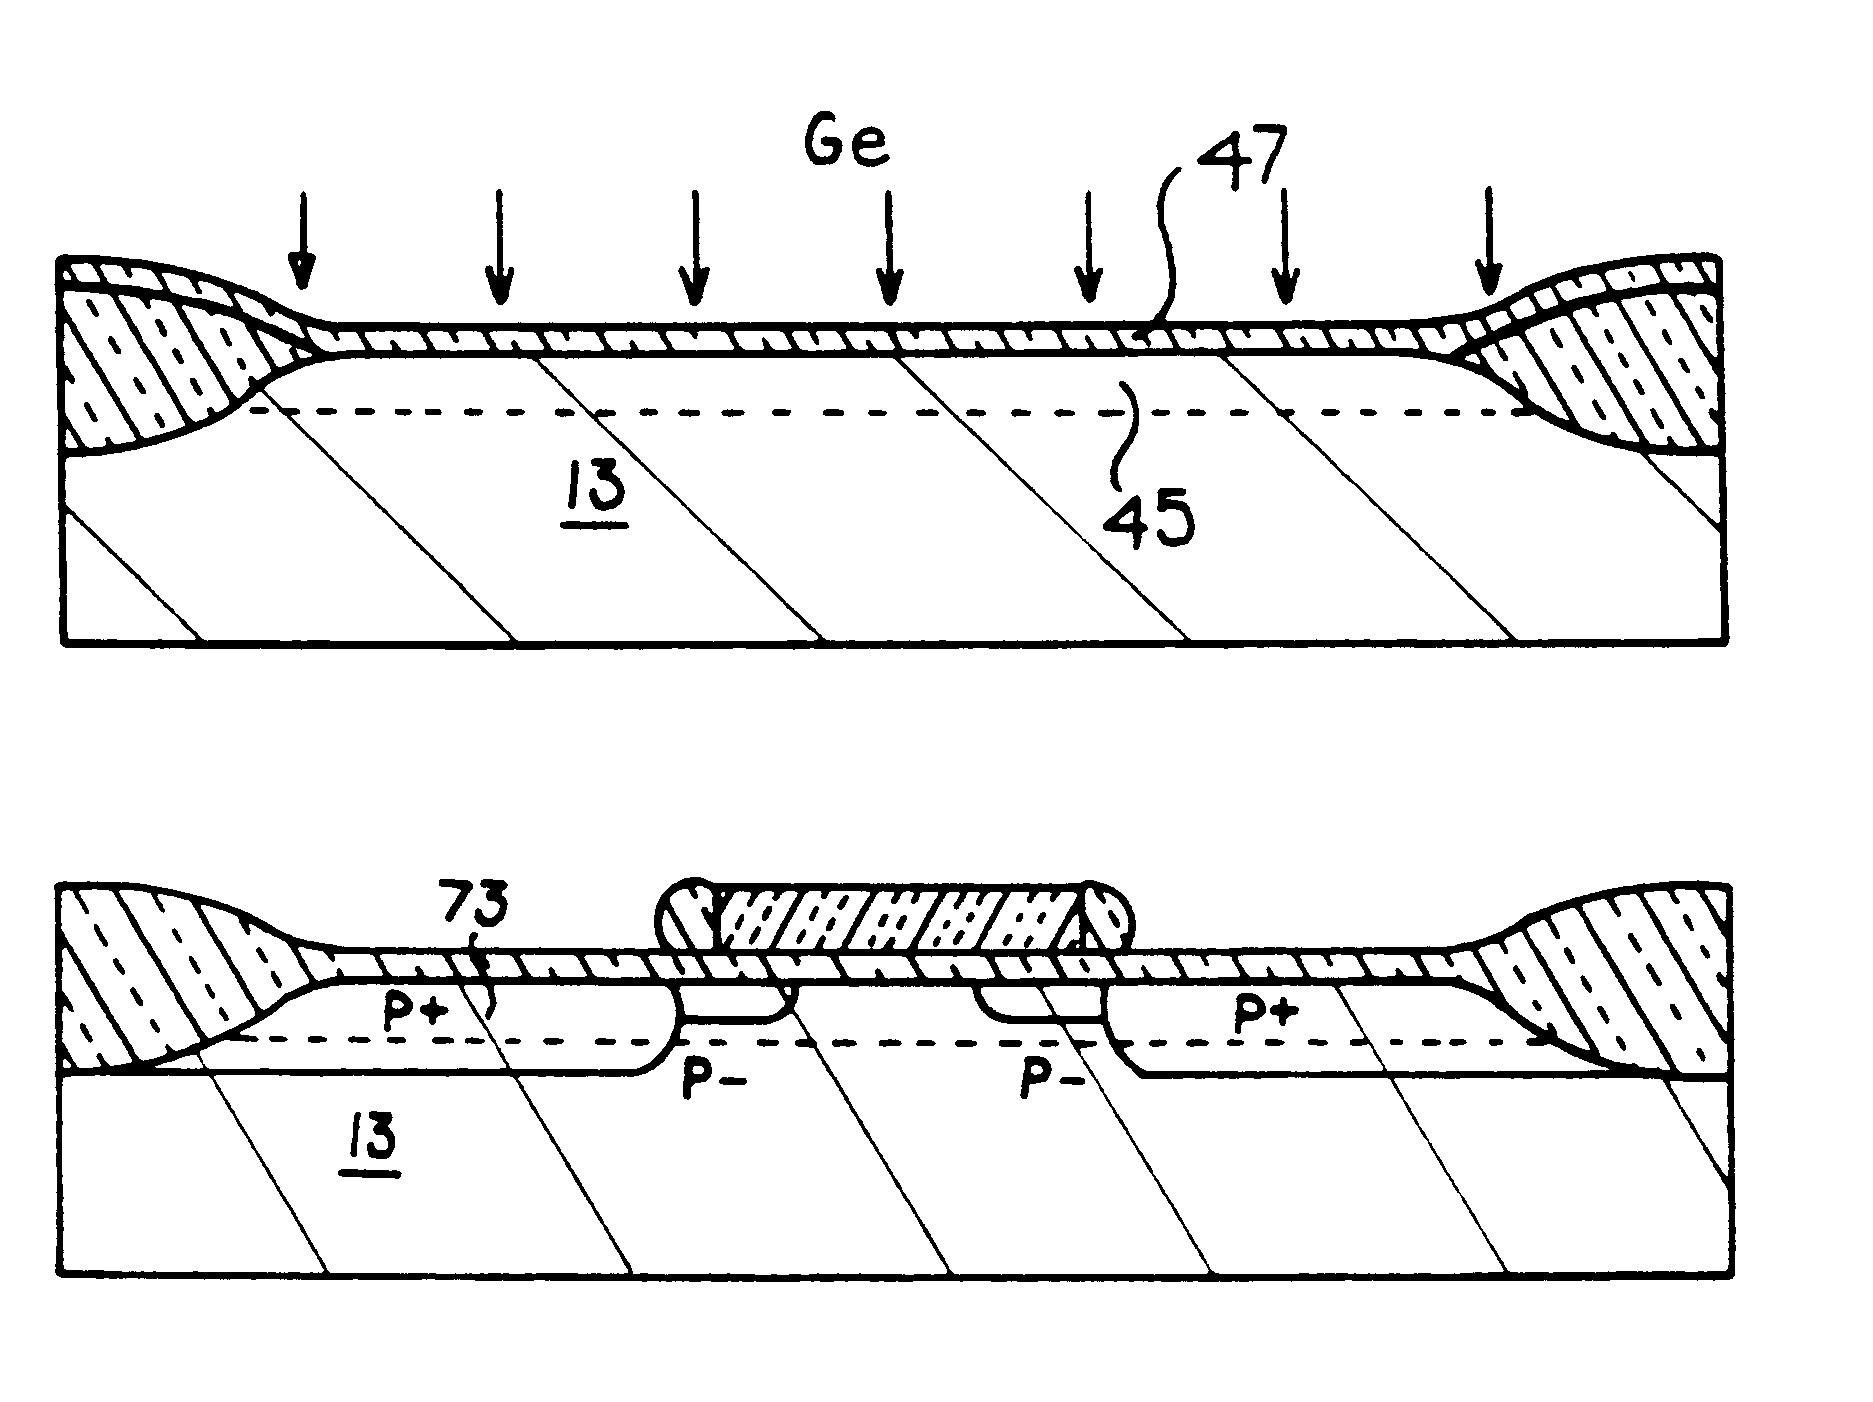 High performance sub-micron P-channel transistor with germanium implant